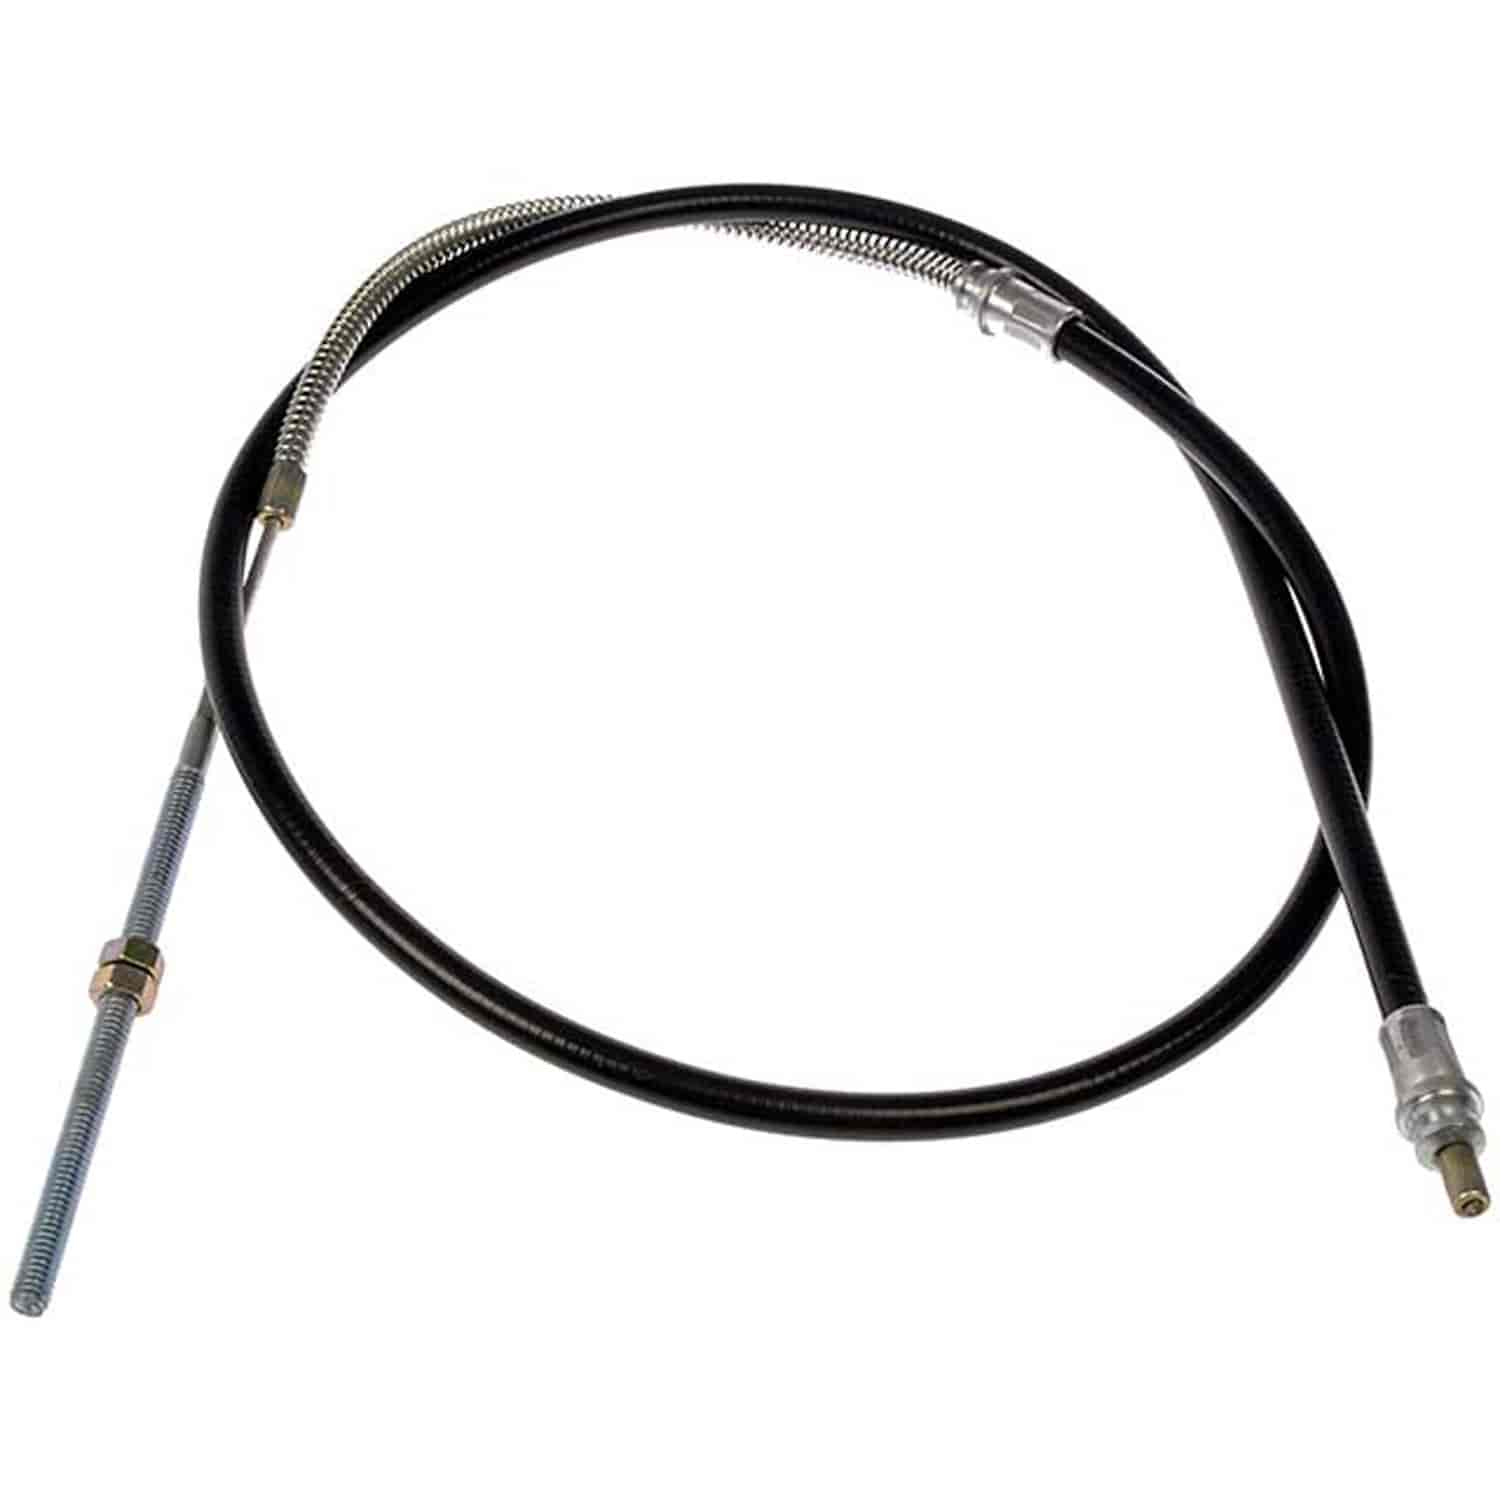 Parking Brake Cable 1973-83 Chevy/GMC Black Rubber